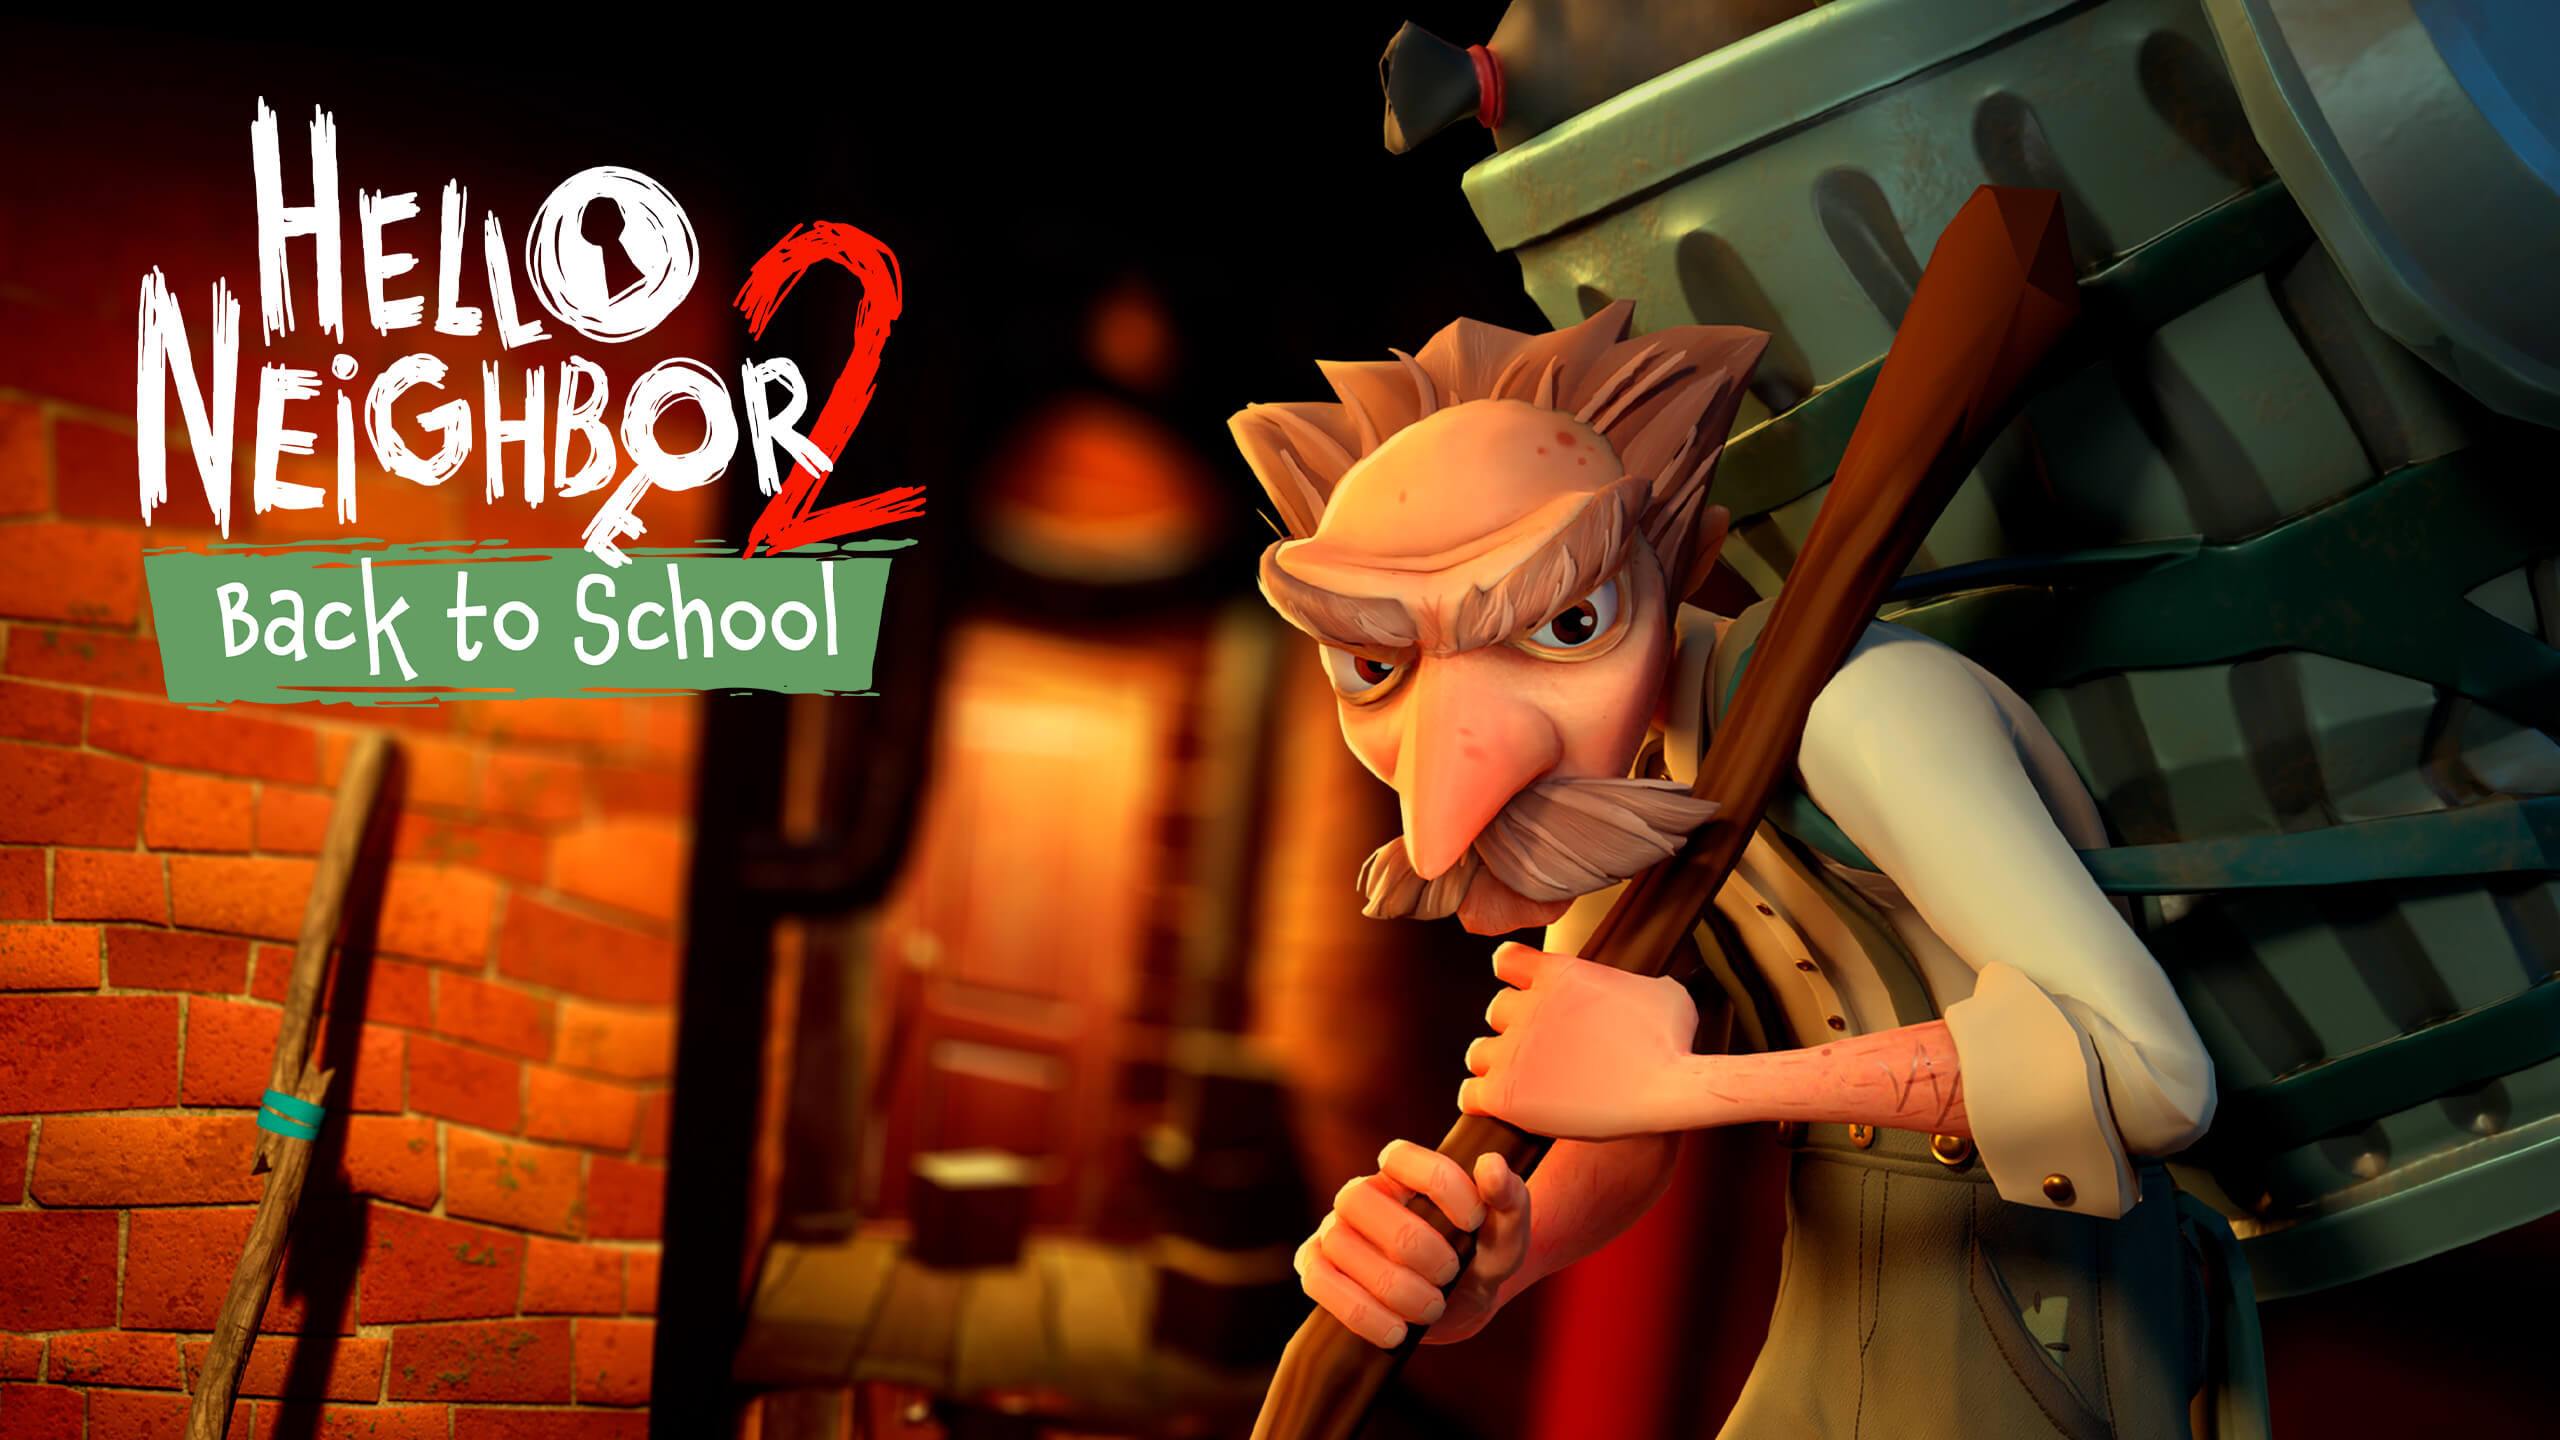 Hello Neighbor 2 (Game): The Back to School DLC, A character known as the Janitor. 2560x1440 HD Background.